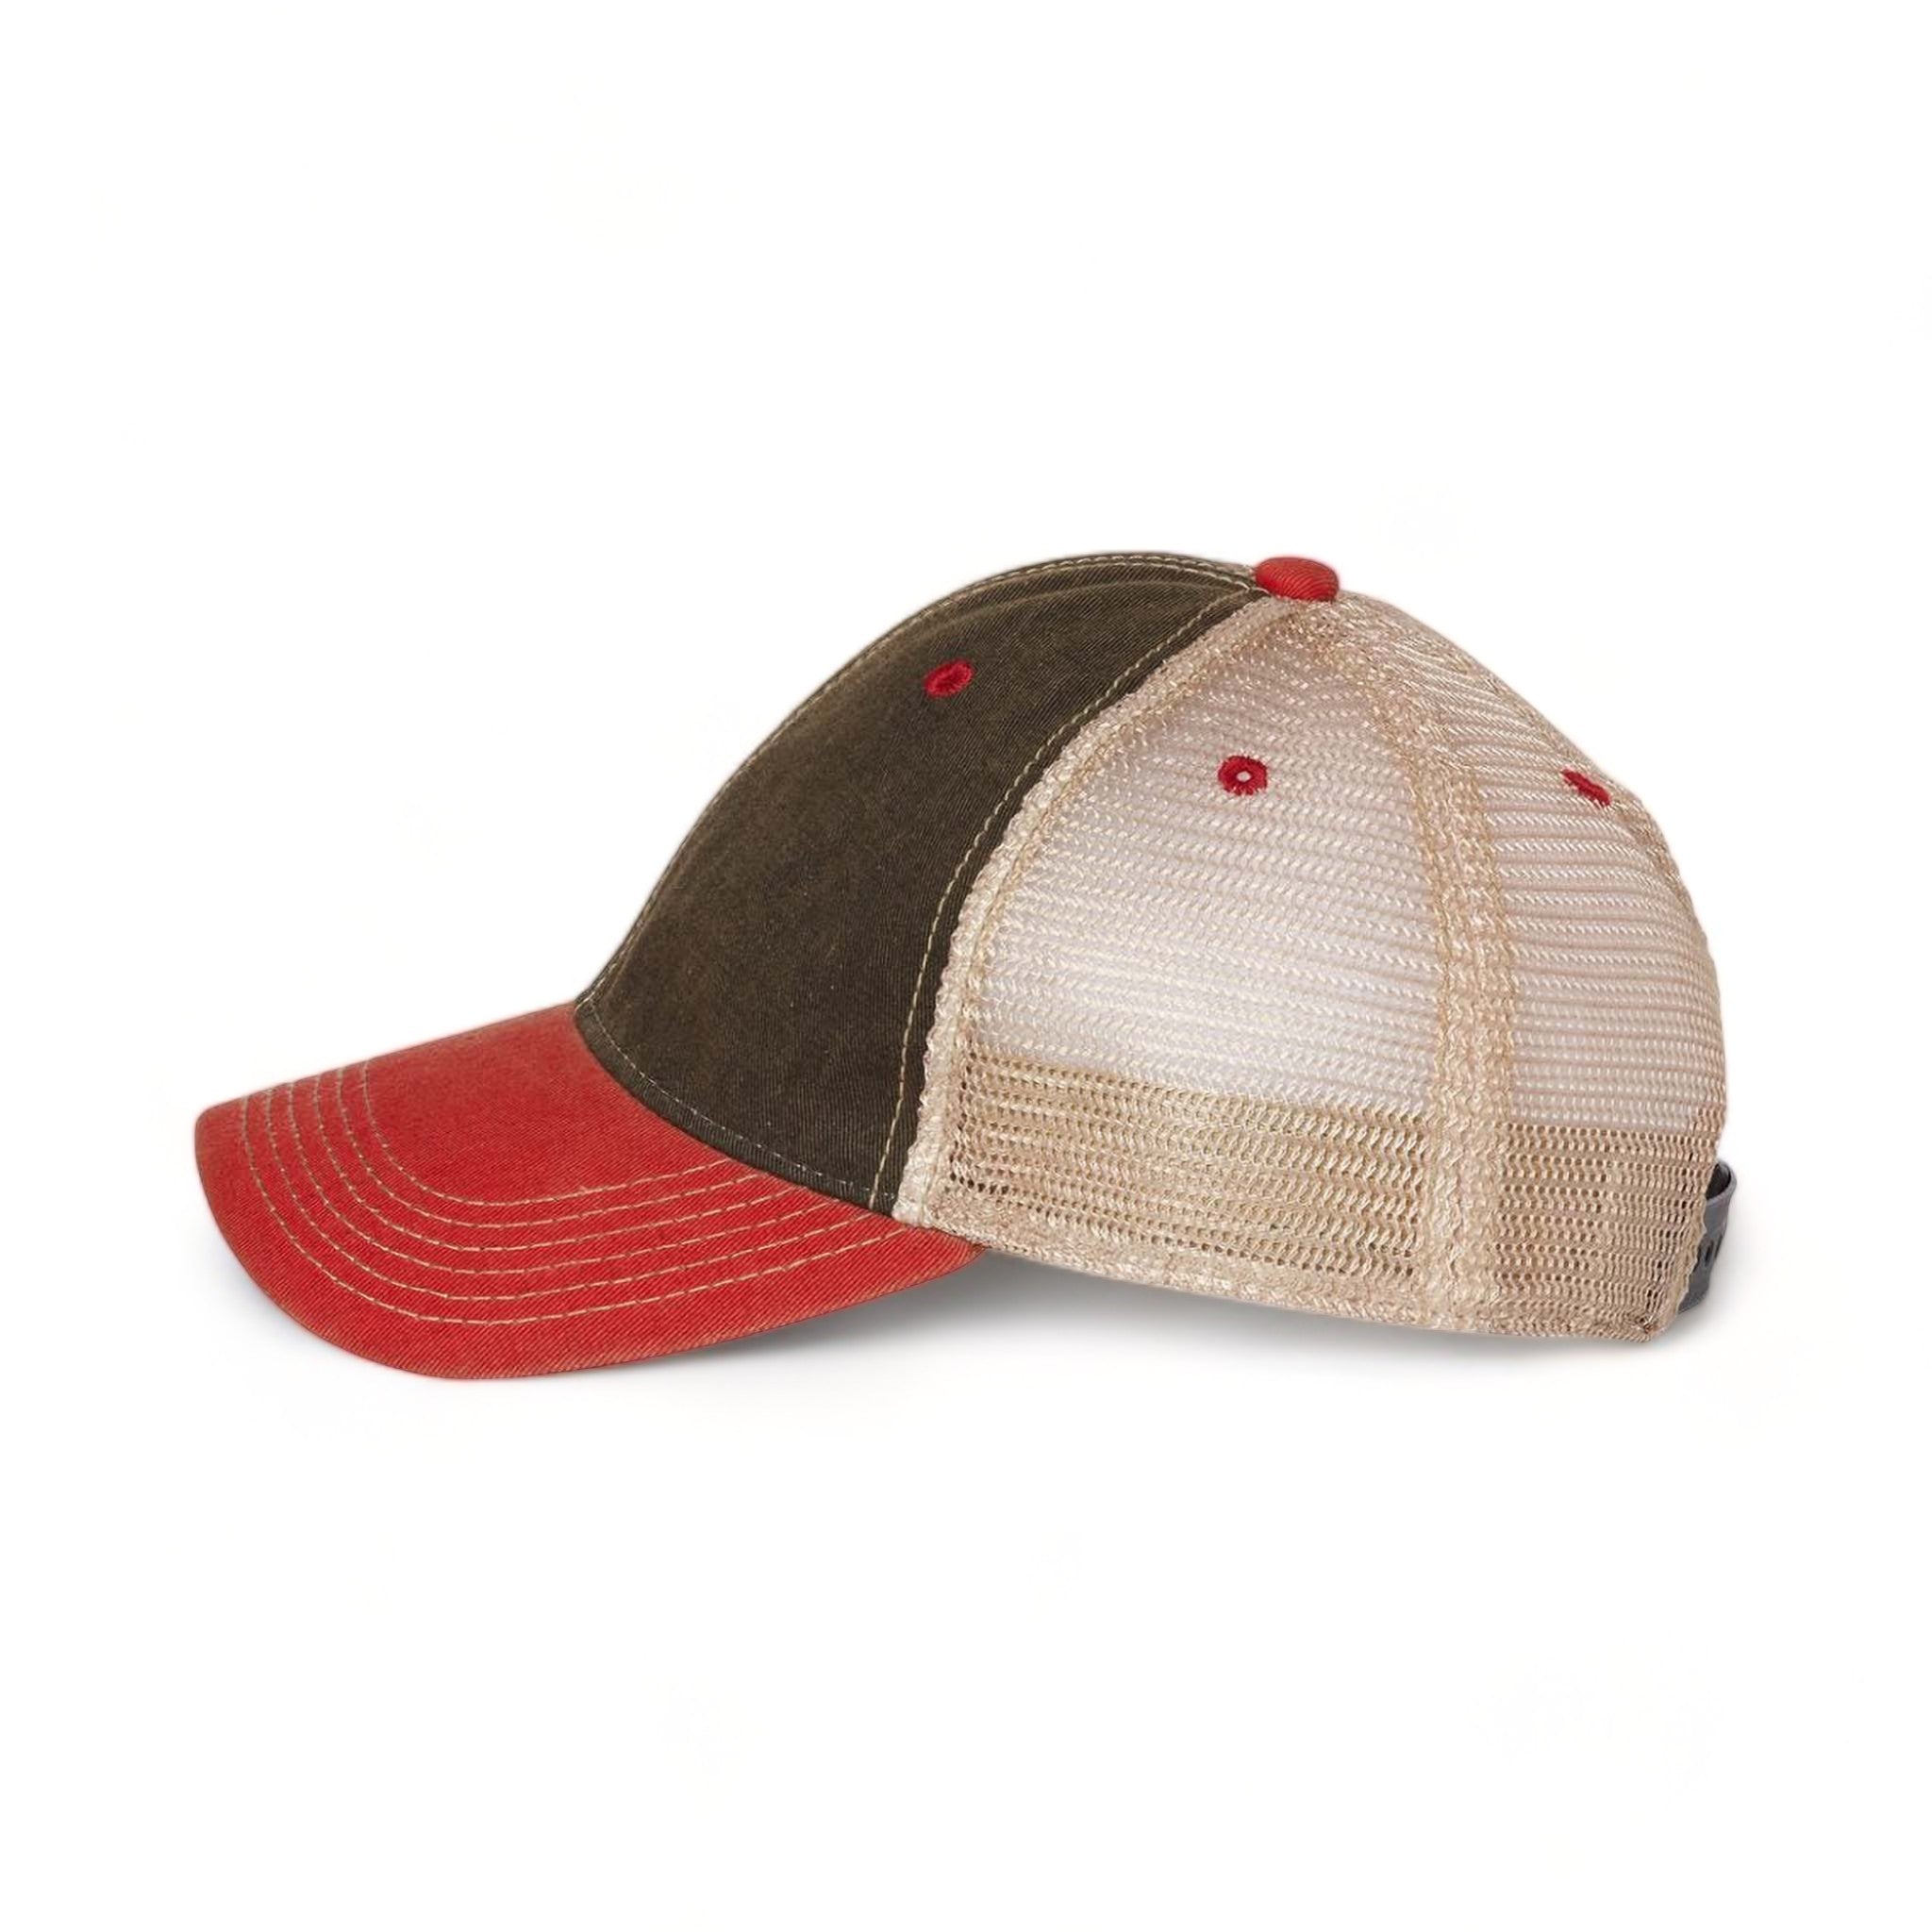 Side view of LEGACY OFA custom hat in black, scarlet red and khaki